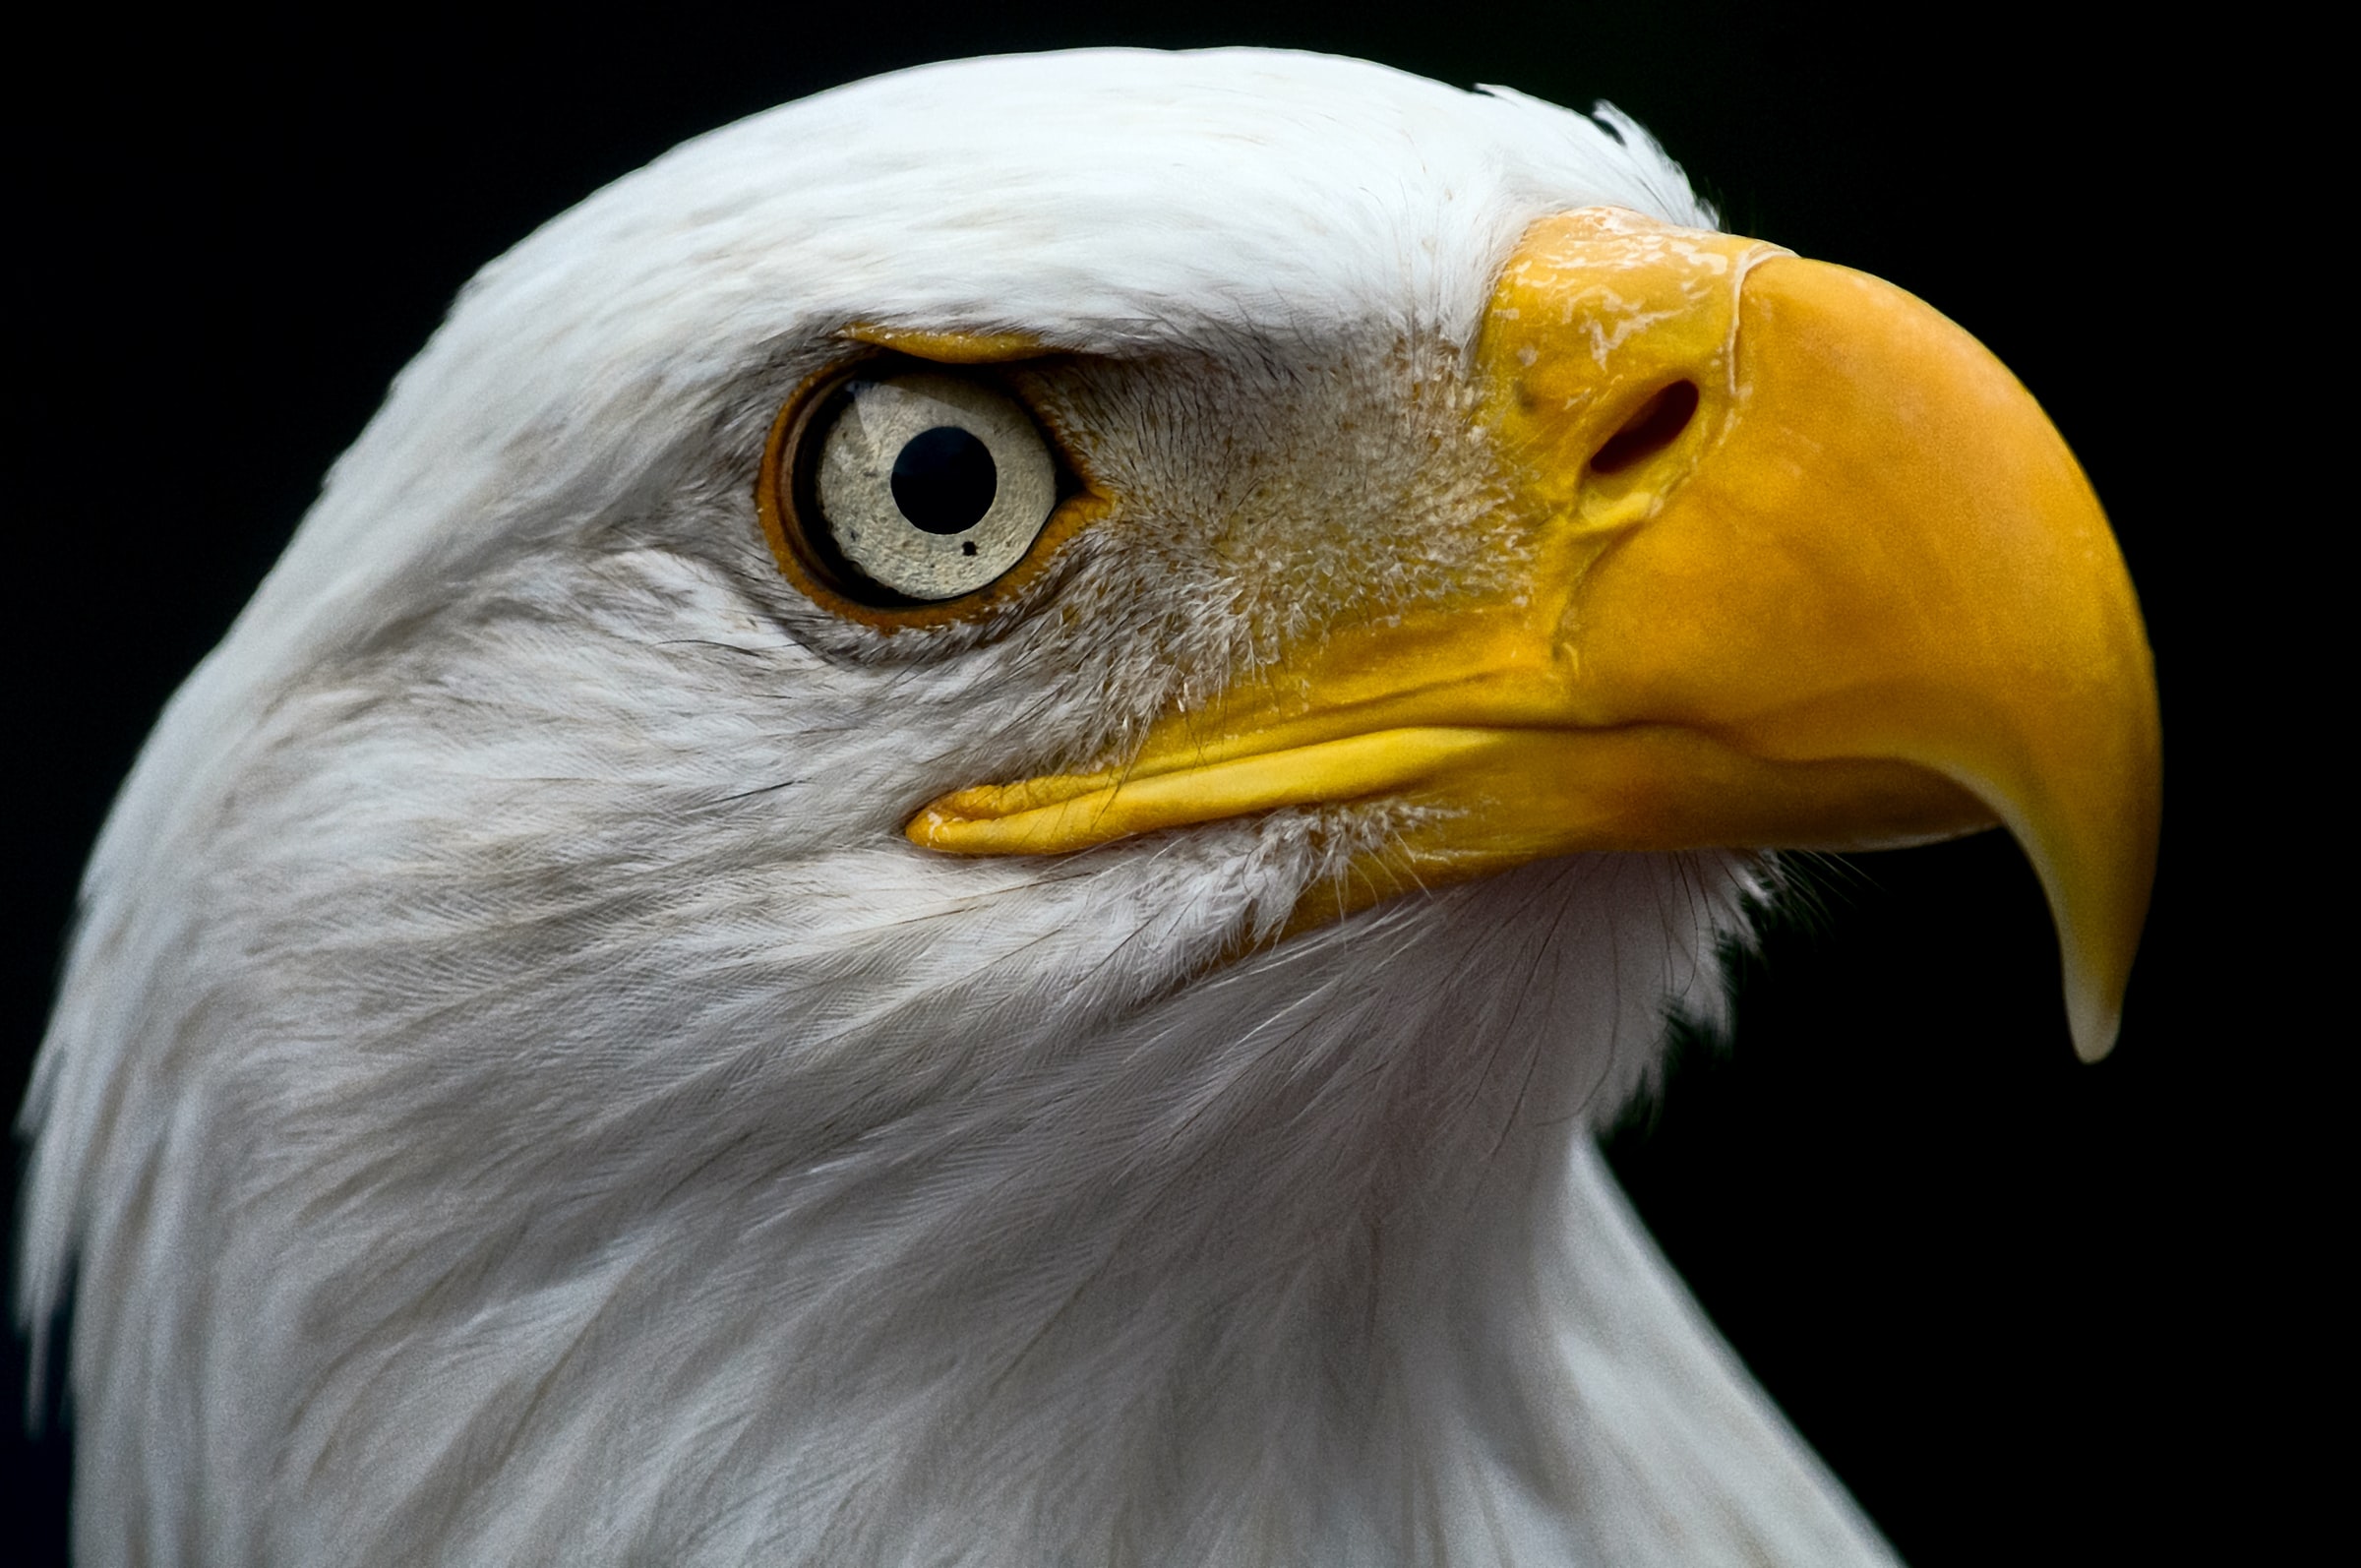 The government sponsored a bounty of 50 cents a bird, and later a dollar, leading to more than 120,000 confirmed killings. By the mid-20th century, all but a few hundred bald eagles were presumed dead, killed off largely by widespread use of the synthetic insecticide DDT. The bald eagle population reached its lowest point of 417 known nesting pairs in 1963, researchers said.